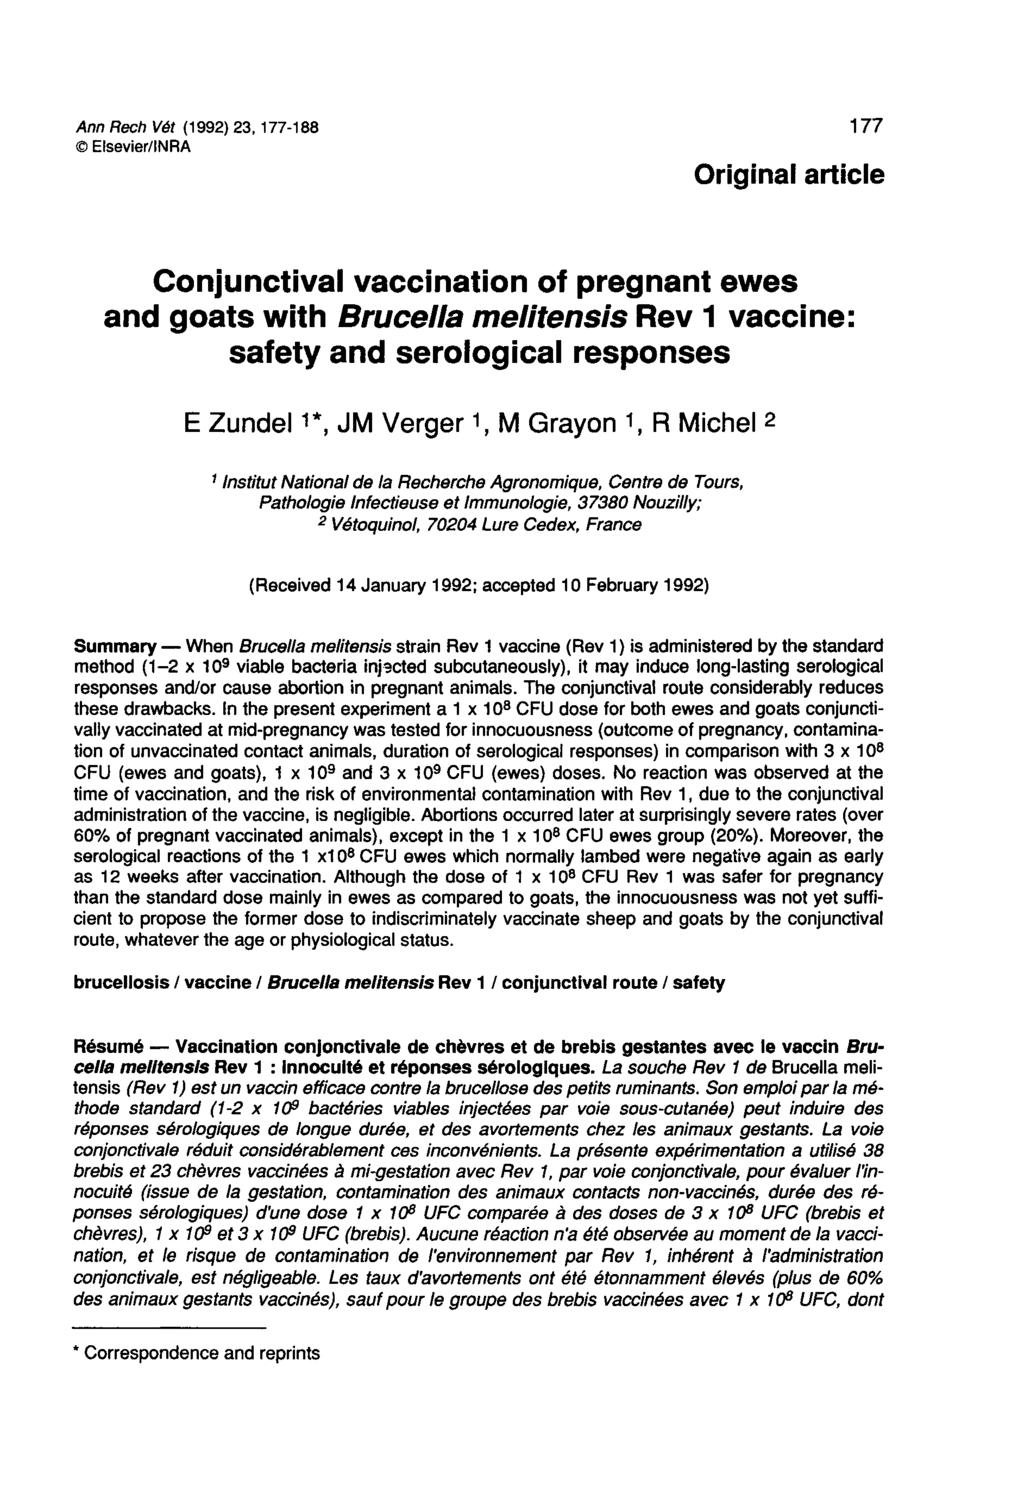 Original article Conjunctival vaccination of pregnant ewes and goats with Brucella melitensis Rev 1 vaccine: safety and serological responses E Zundel JM Verger M Grayon R Michel 1 Institut National